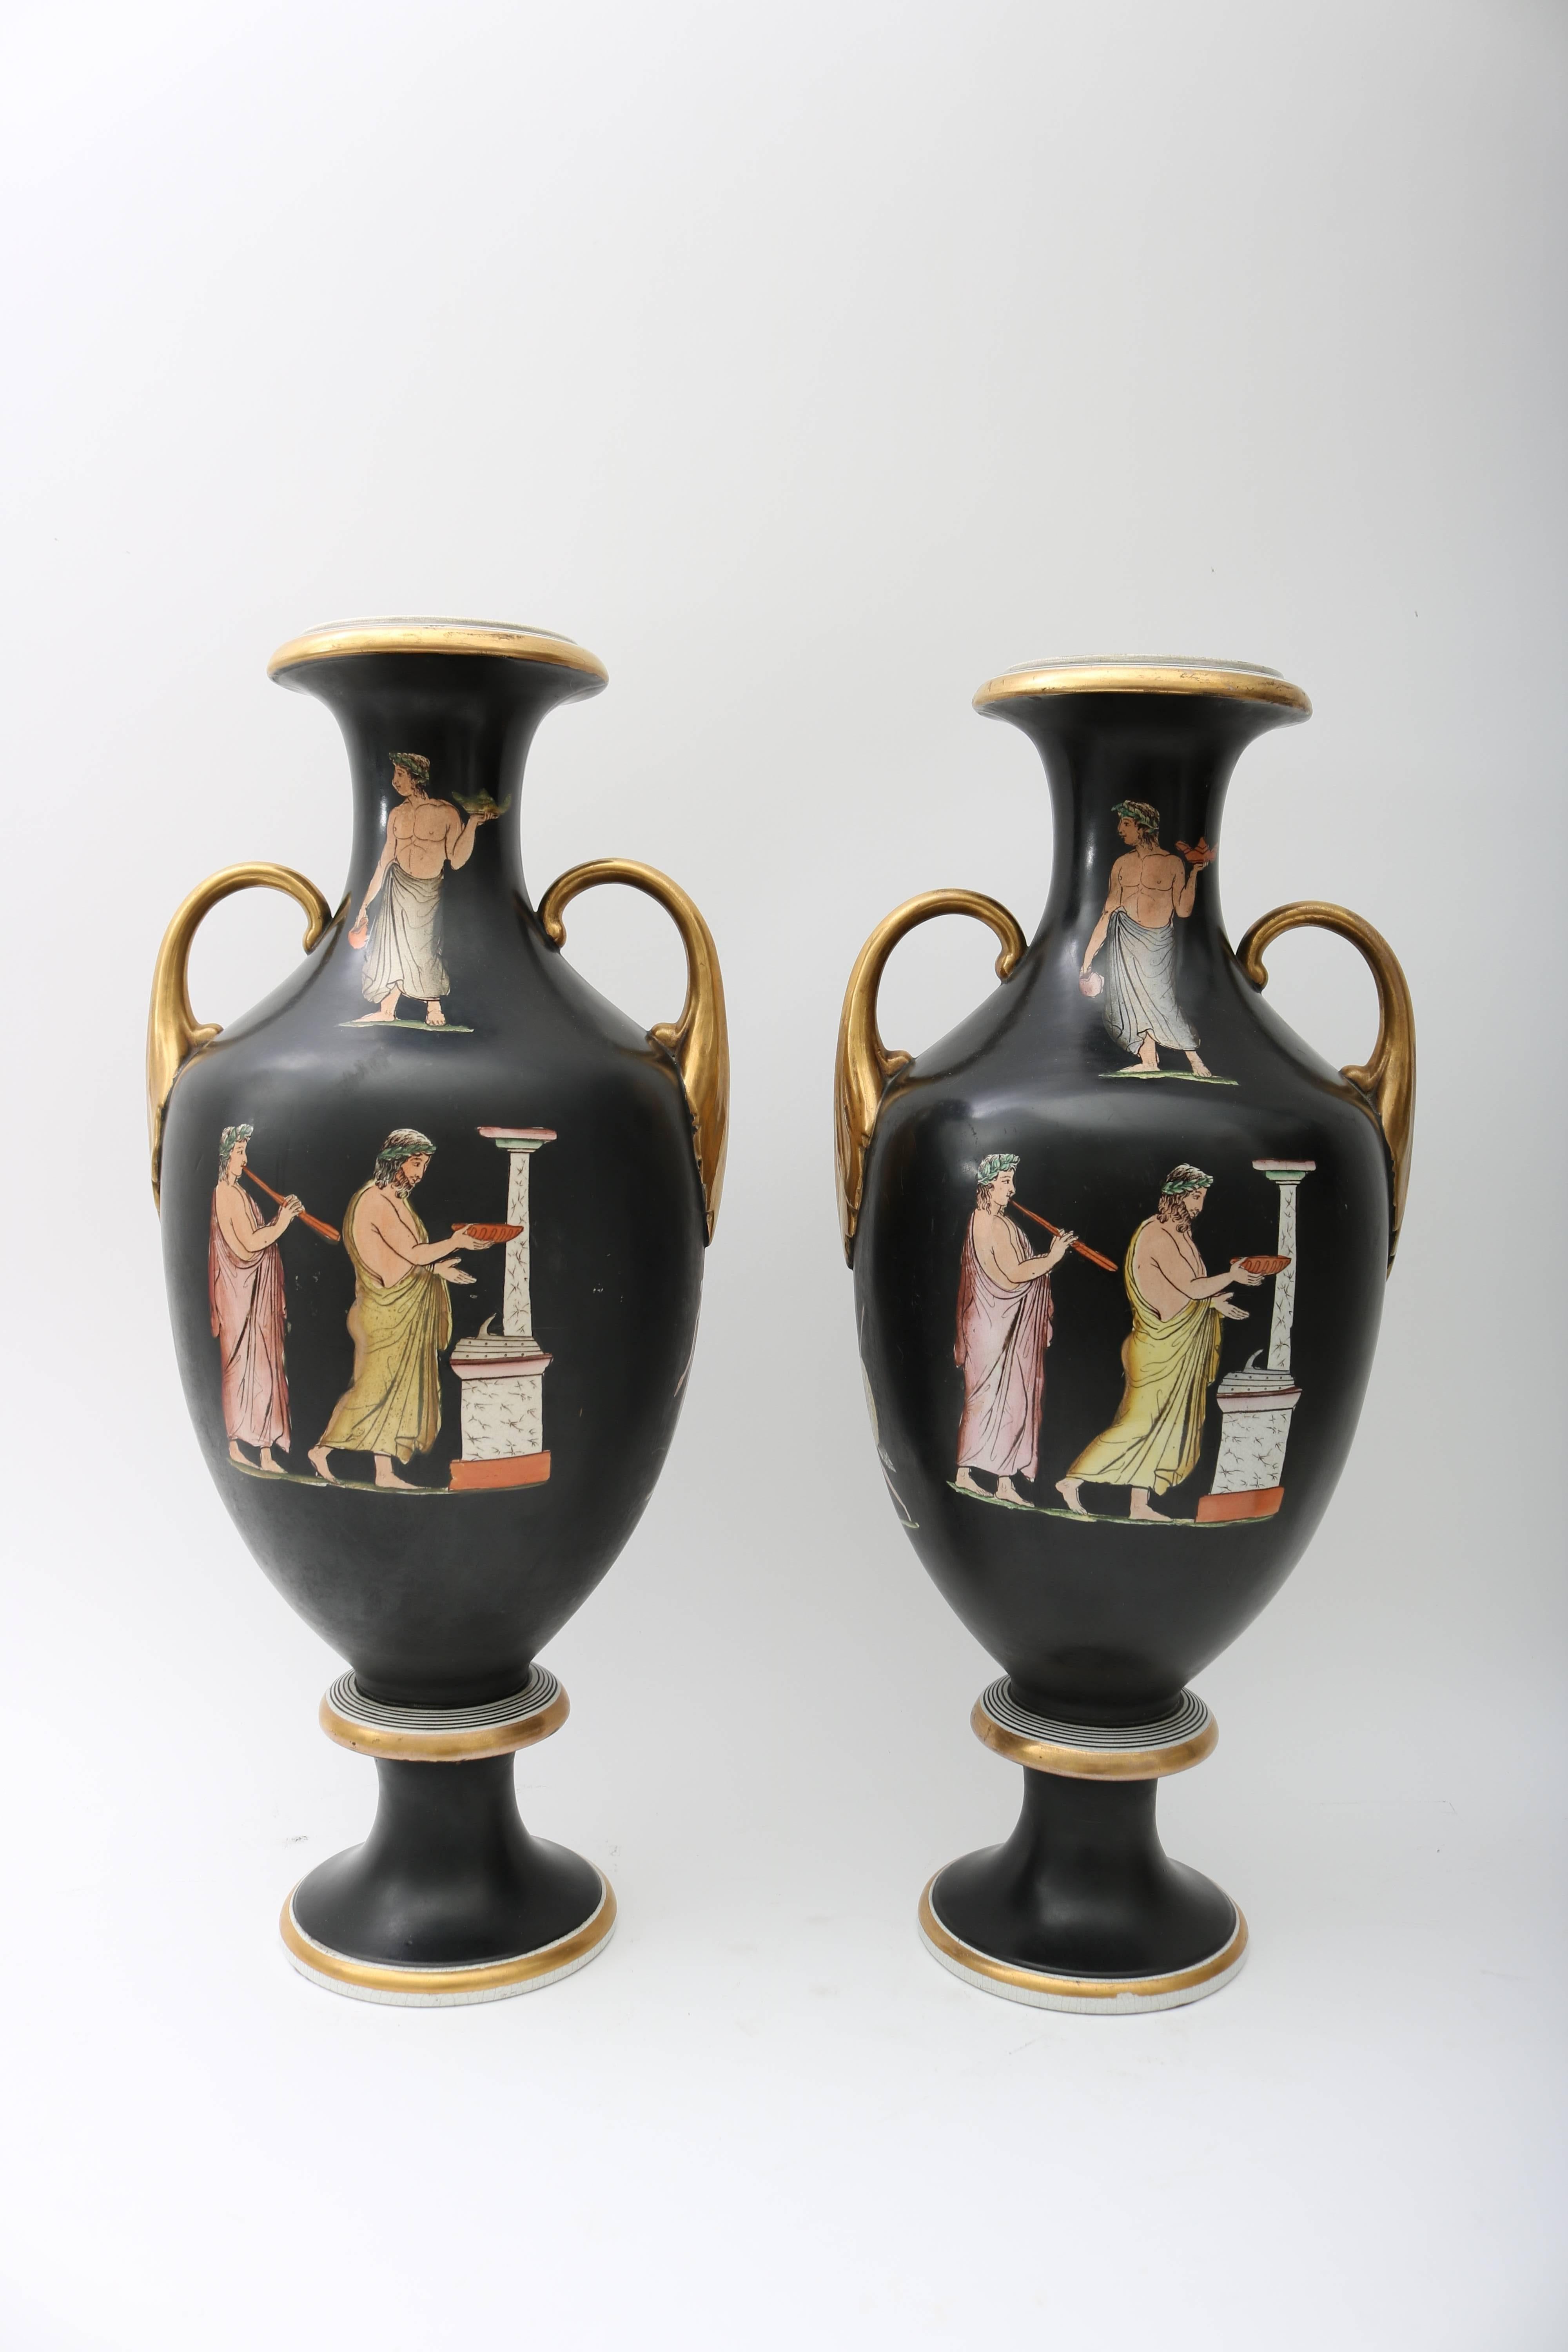 This pair of vases date to the late 19th century and would have been originally purchased while one was on the 